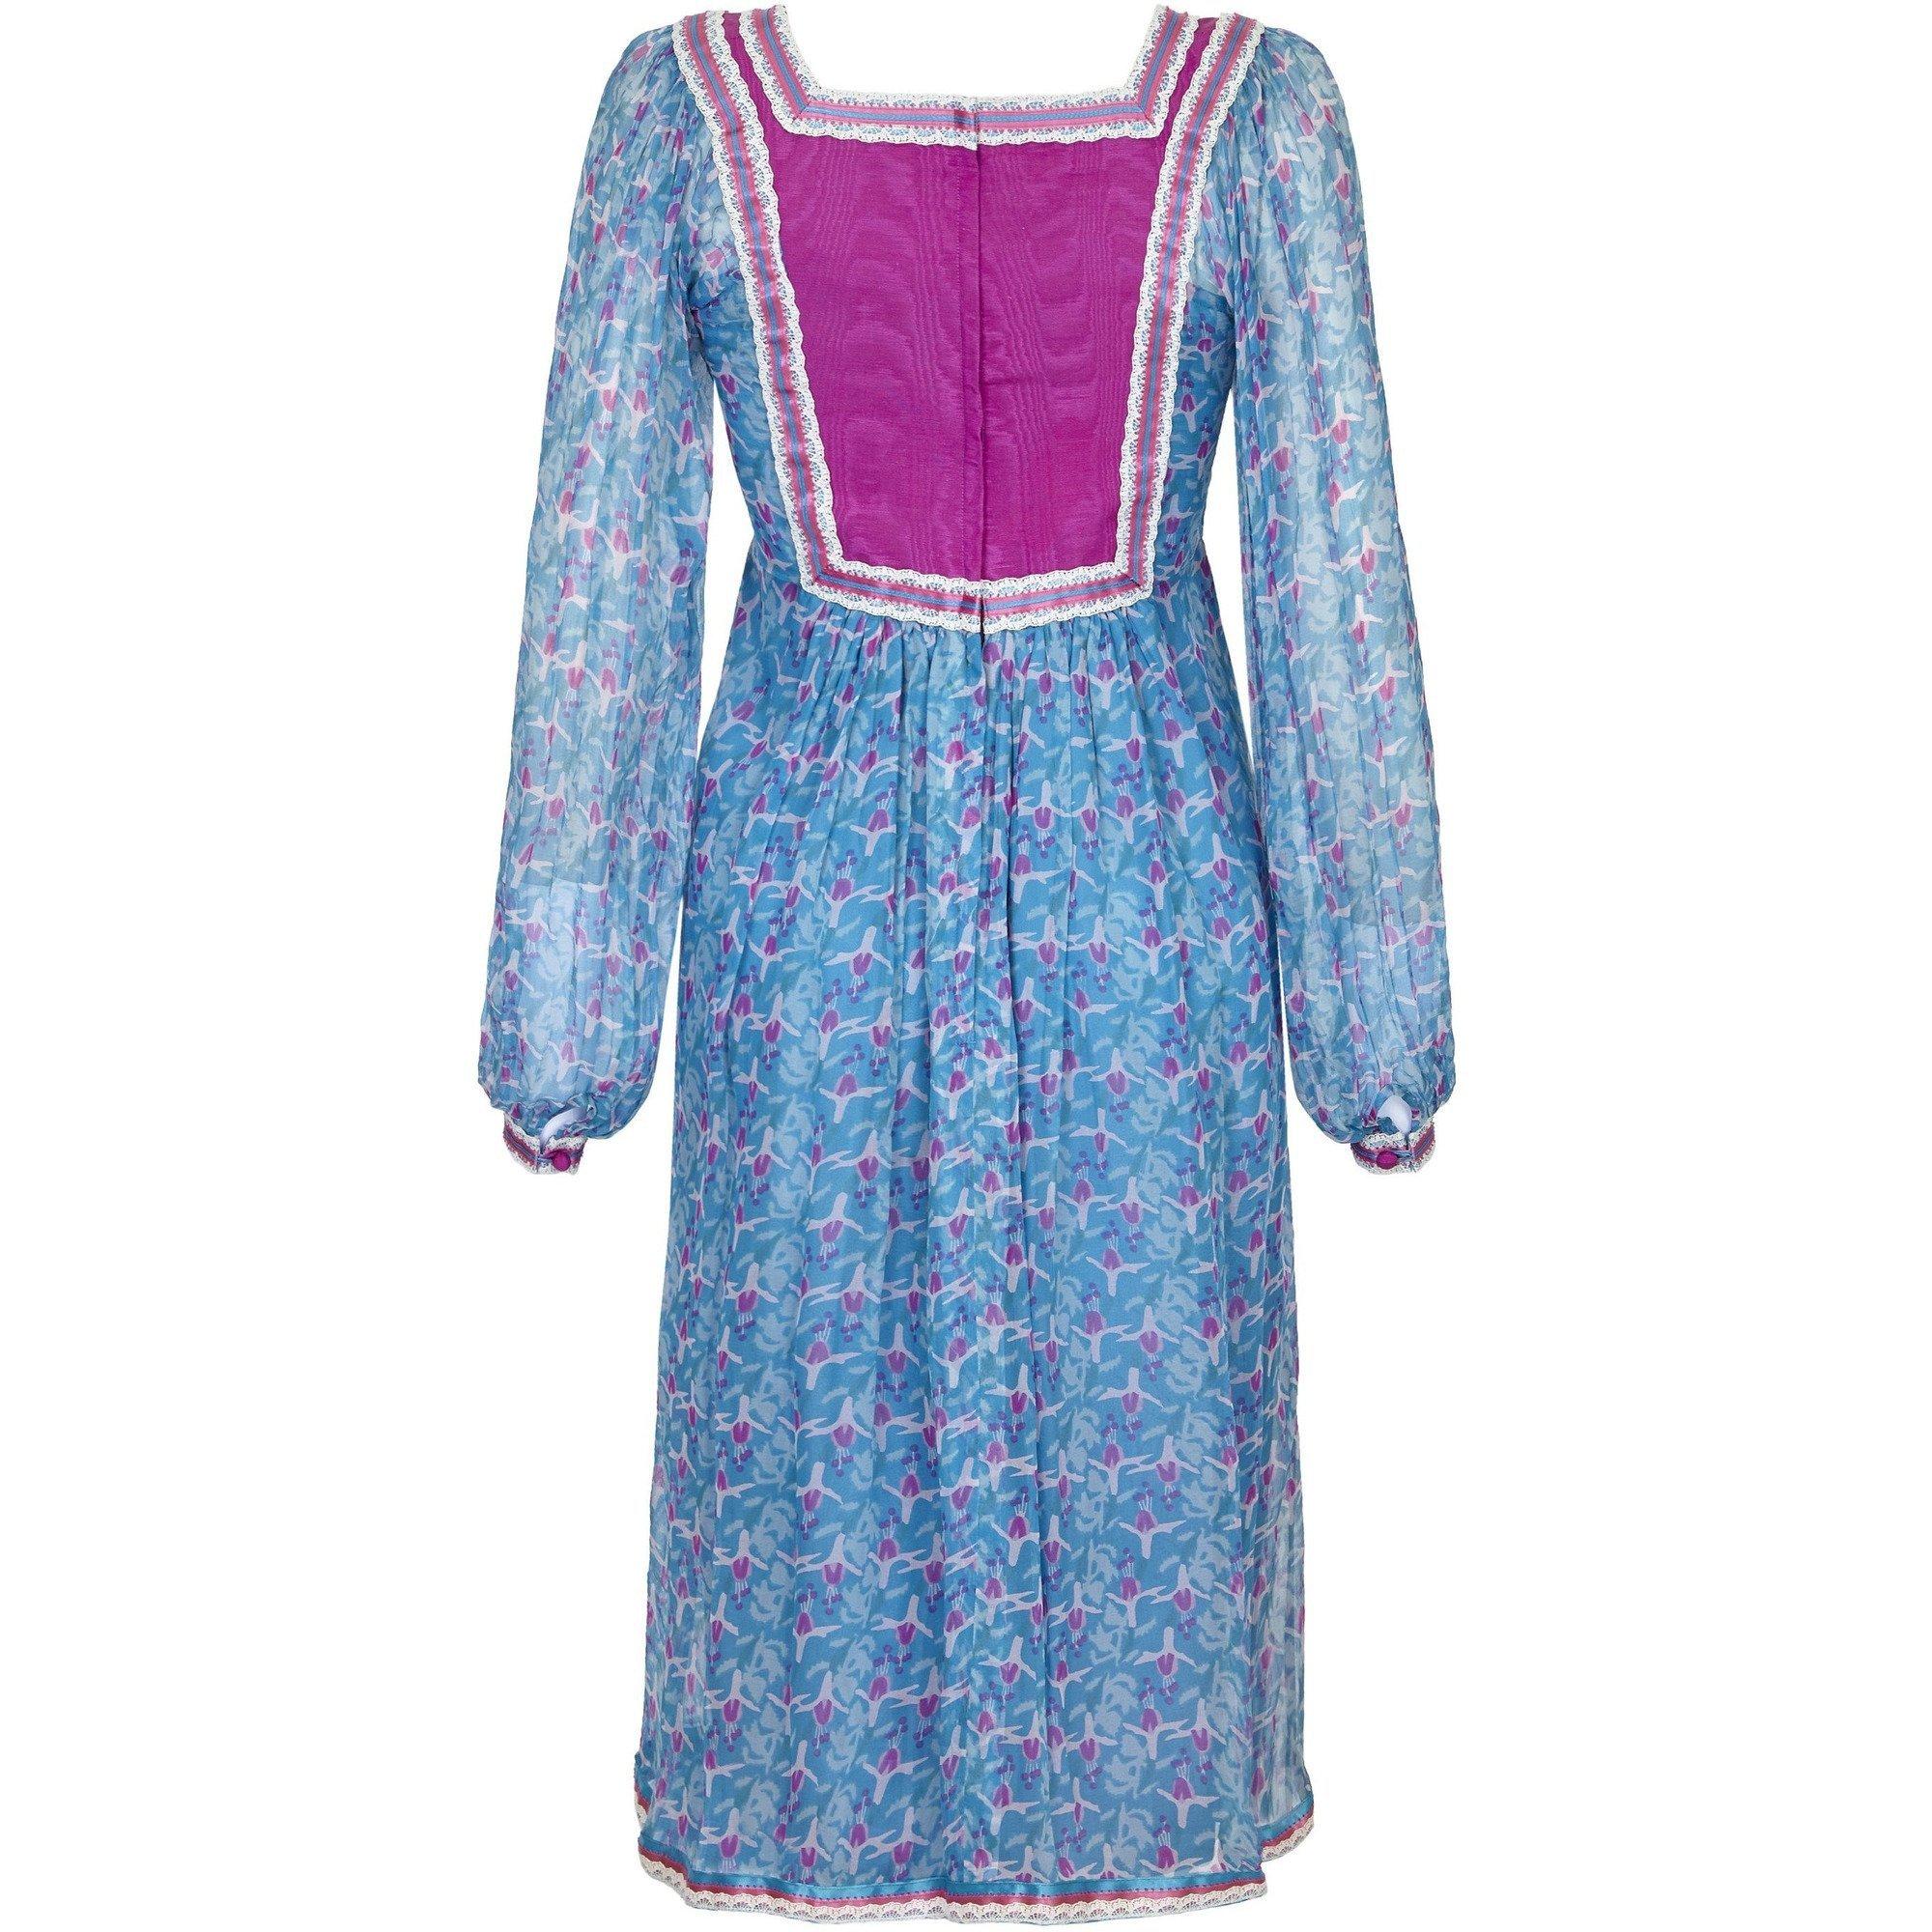 This charming late 1960s vintage or early 1970s blue and pink floral printed silk chiffon dress is from London design house Rumak, who created clothes to emulate the style and certainly the quality of  celebrated designer Thea Porter. This lovely